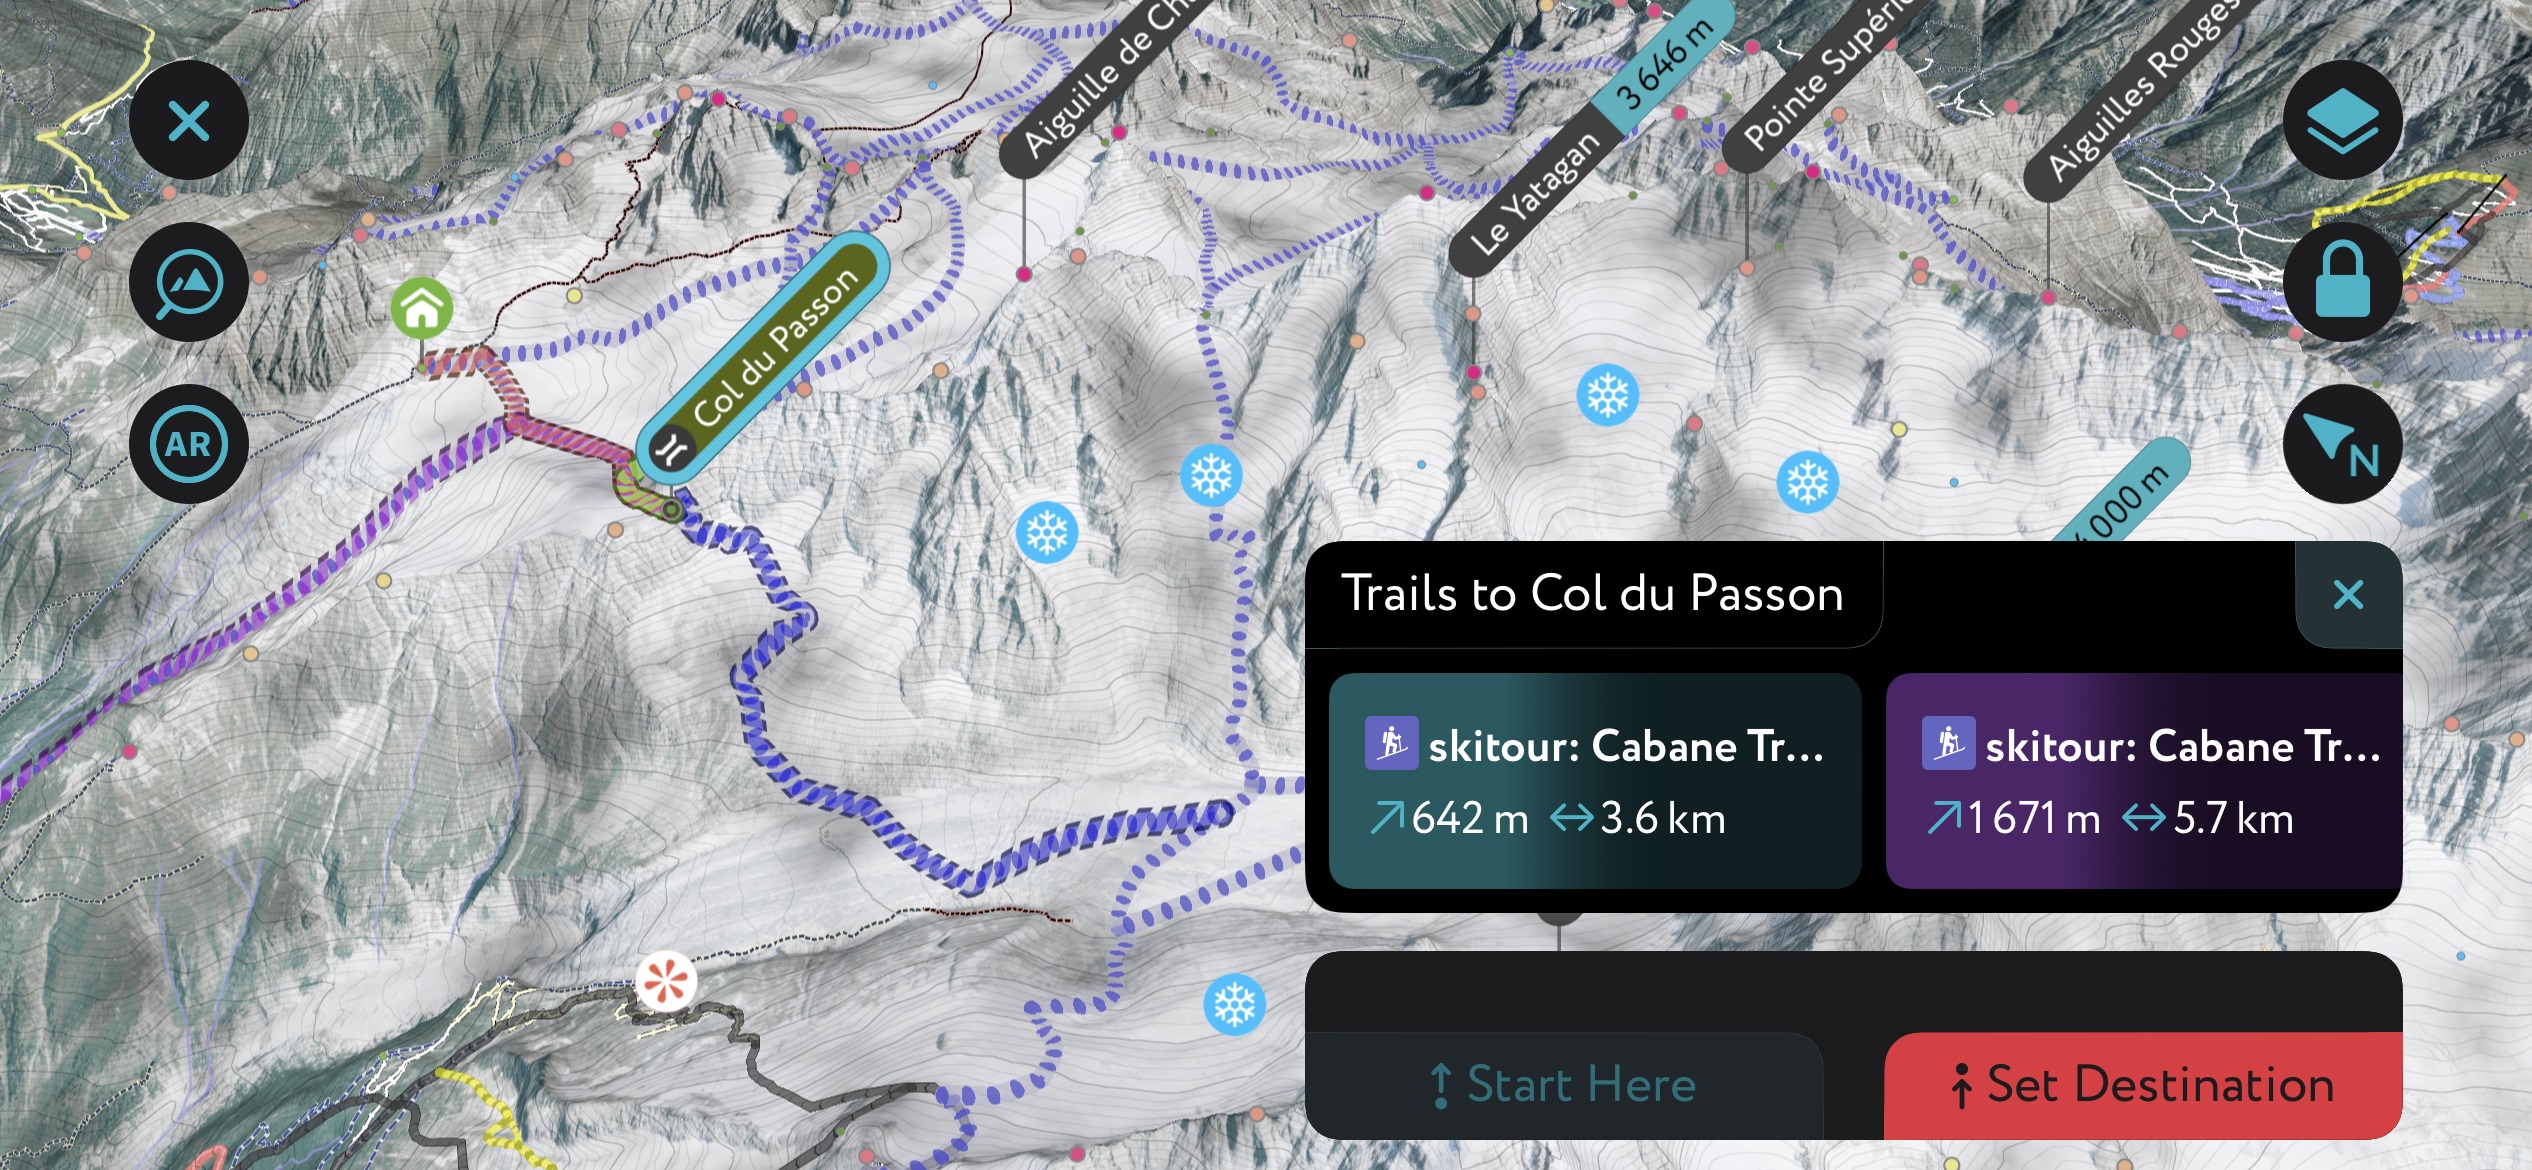 The Secrets to Finding the Best Snow Off-Piste.
             The Col du Passon, one of the ultimate lift-access ski tours from the Grands Montets.